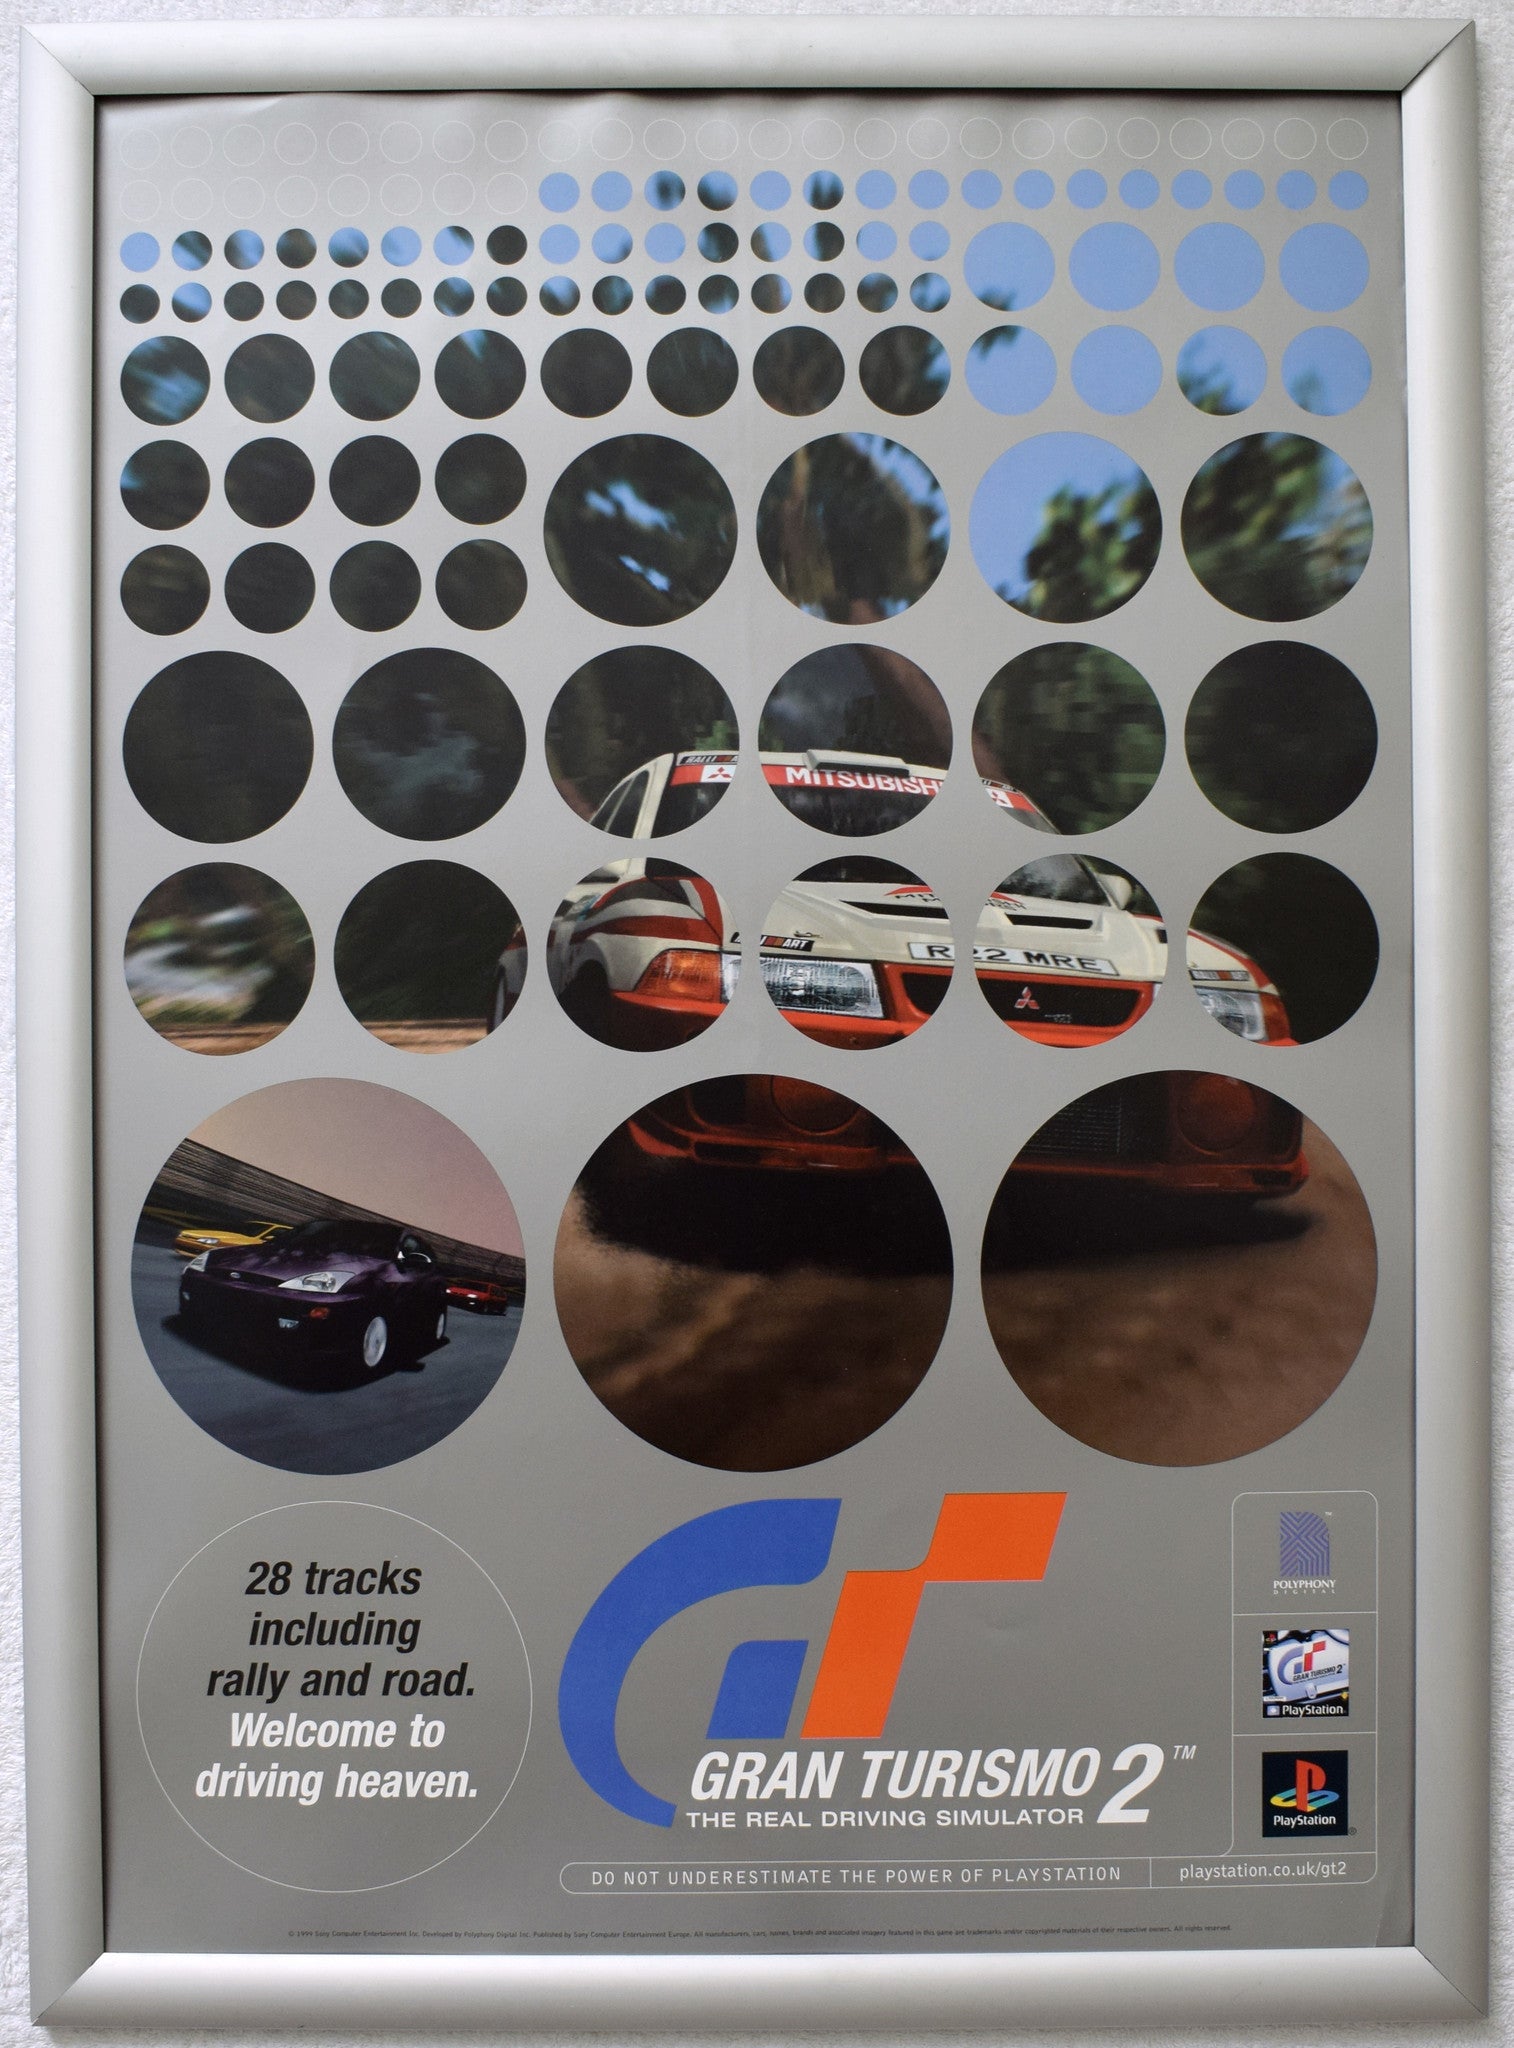 Gran Turismo 2 (A2) Promotional Poster #3